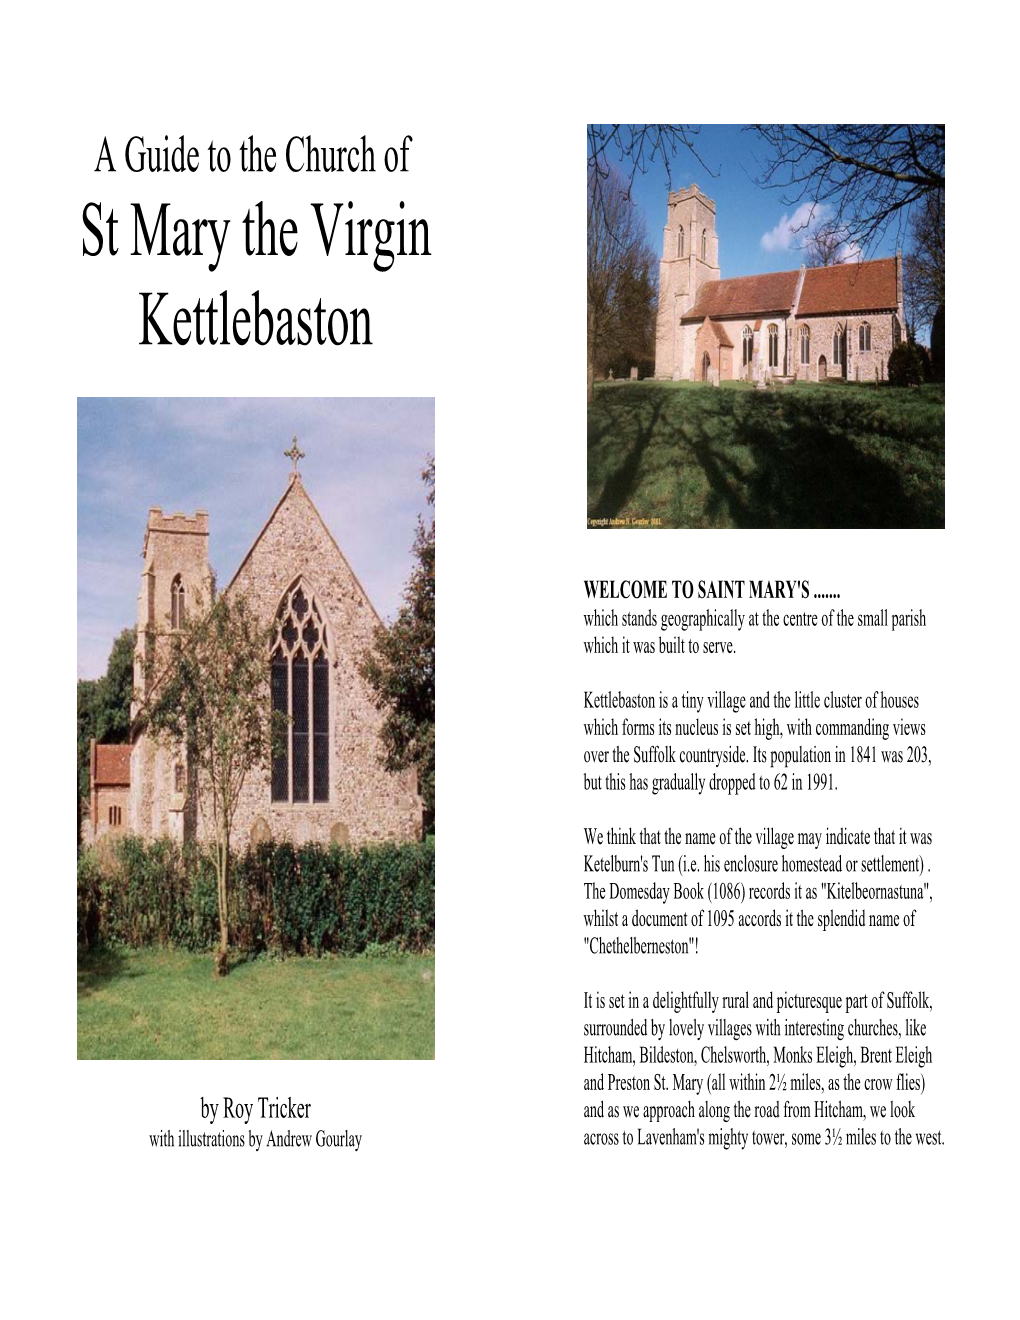 A Guide to the Church of St Mary the Virgin Kettlebaston